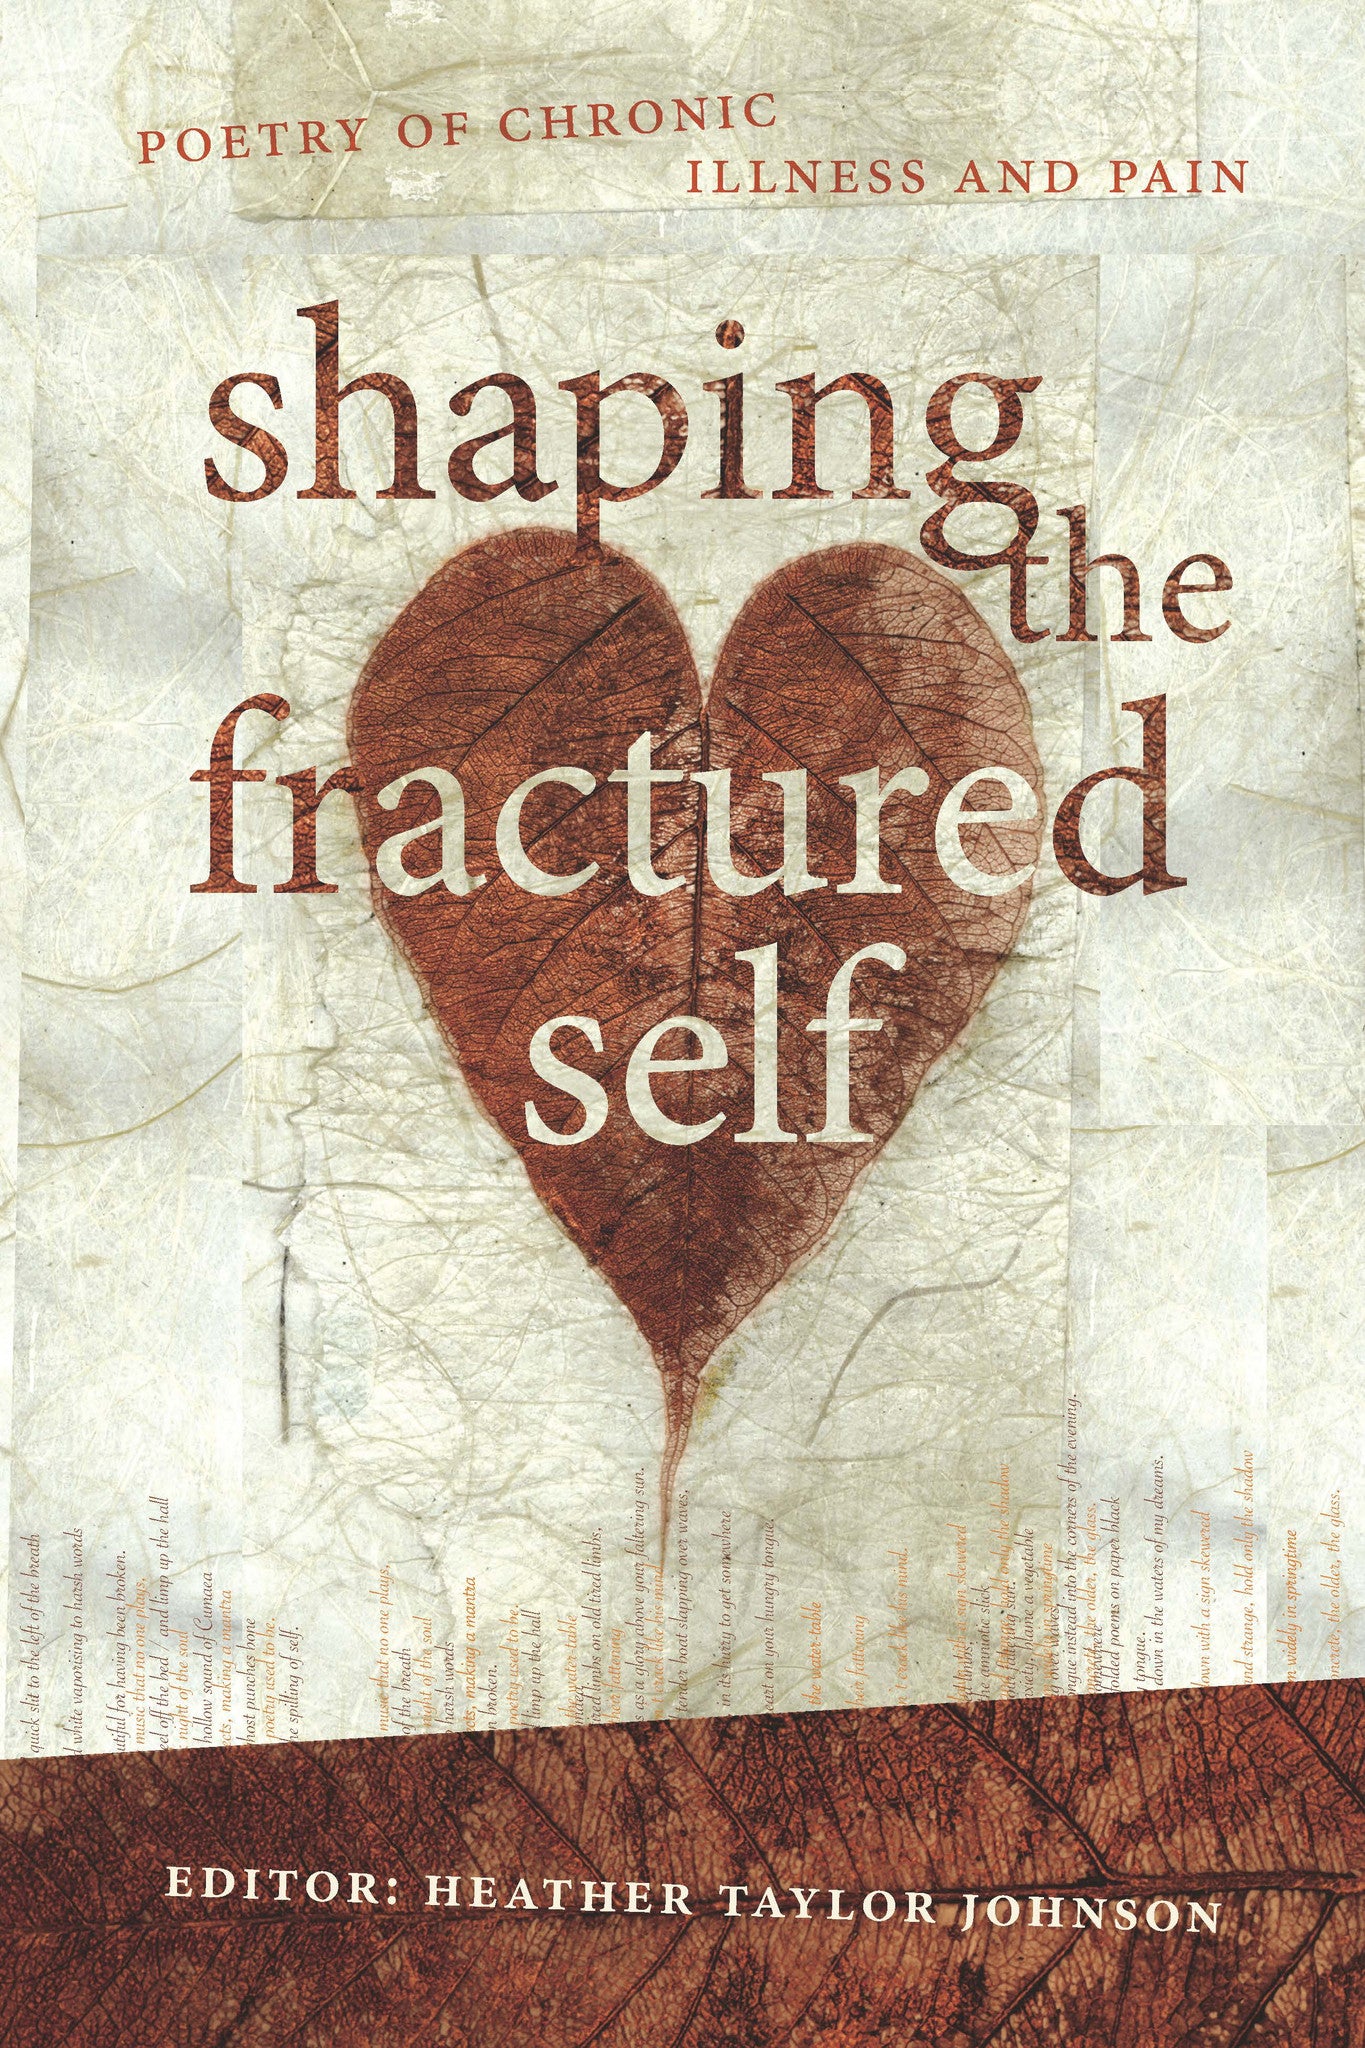 Shaping the Fractured Self: poetry of chronic illness and pain